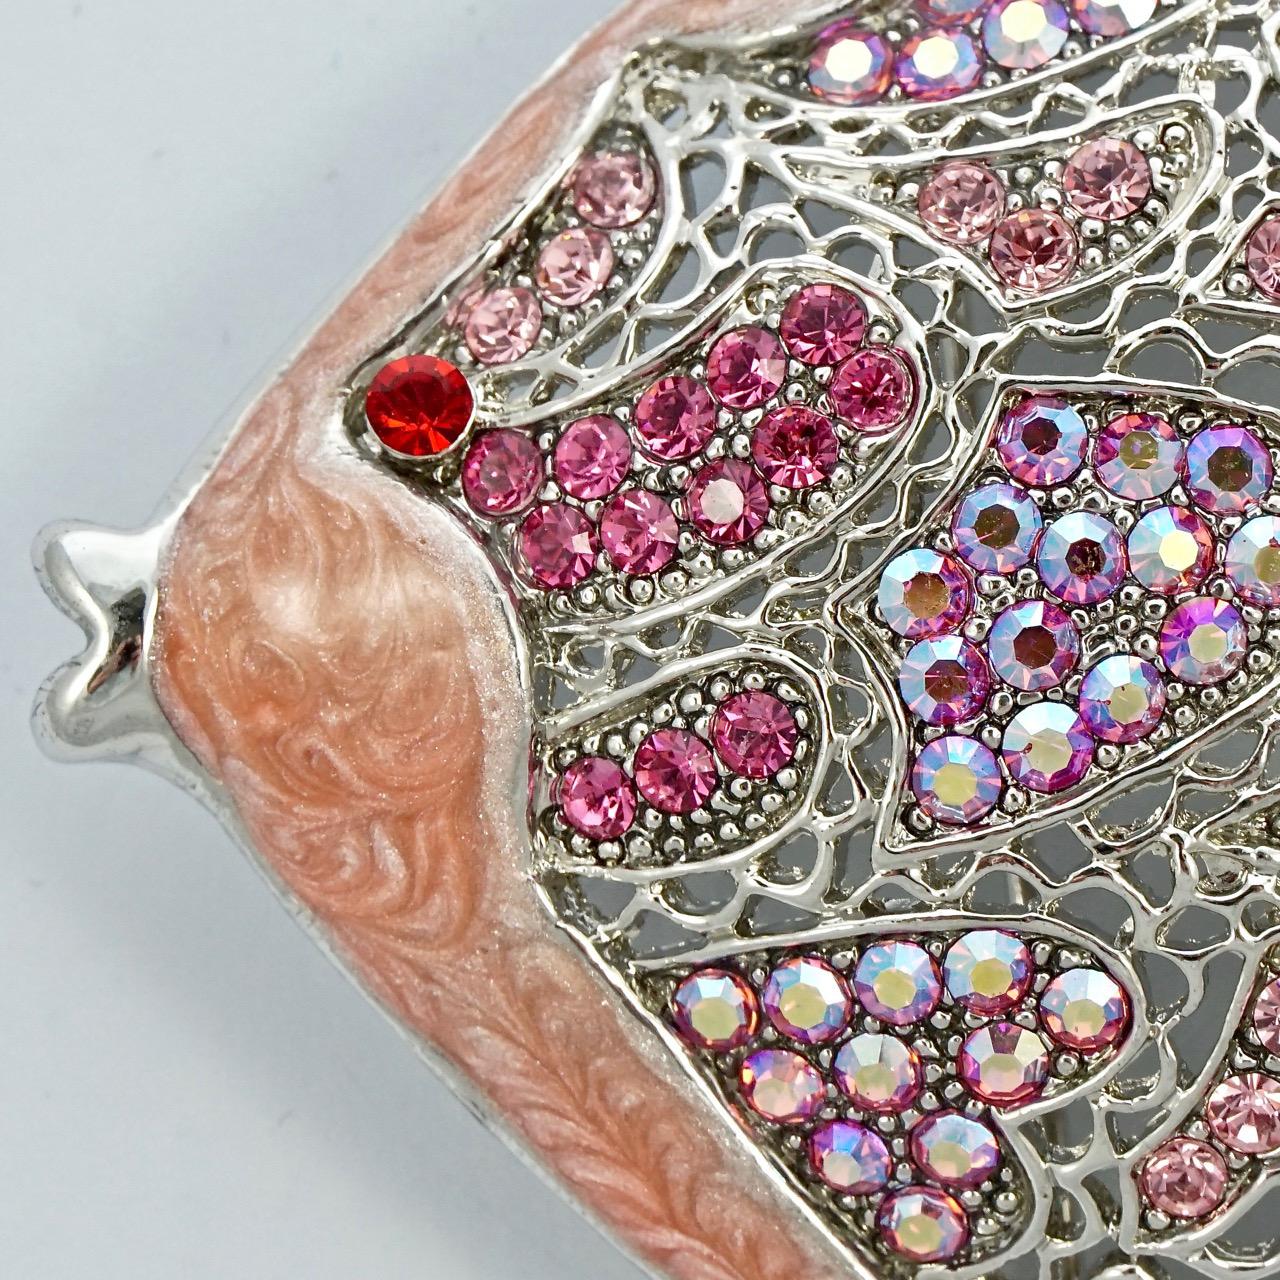 Wonderful large vintage silver tone and pink enamel fish brooch, with sparkling pink aurora borealis, pale pink and rose pink rhinestones. Measuring length 8cm / 3.1 inches by width 9cm / 3.5 inches. The brooch is in very good condition, and is